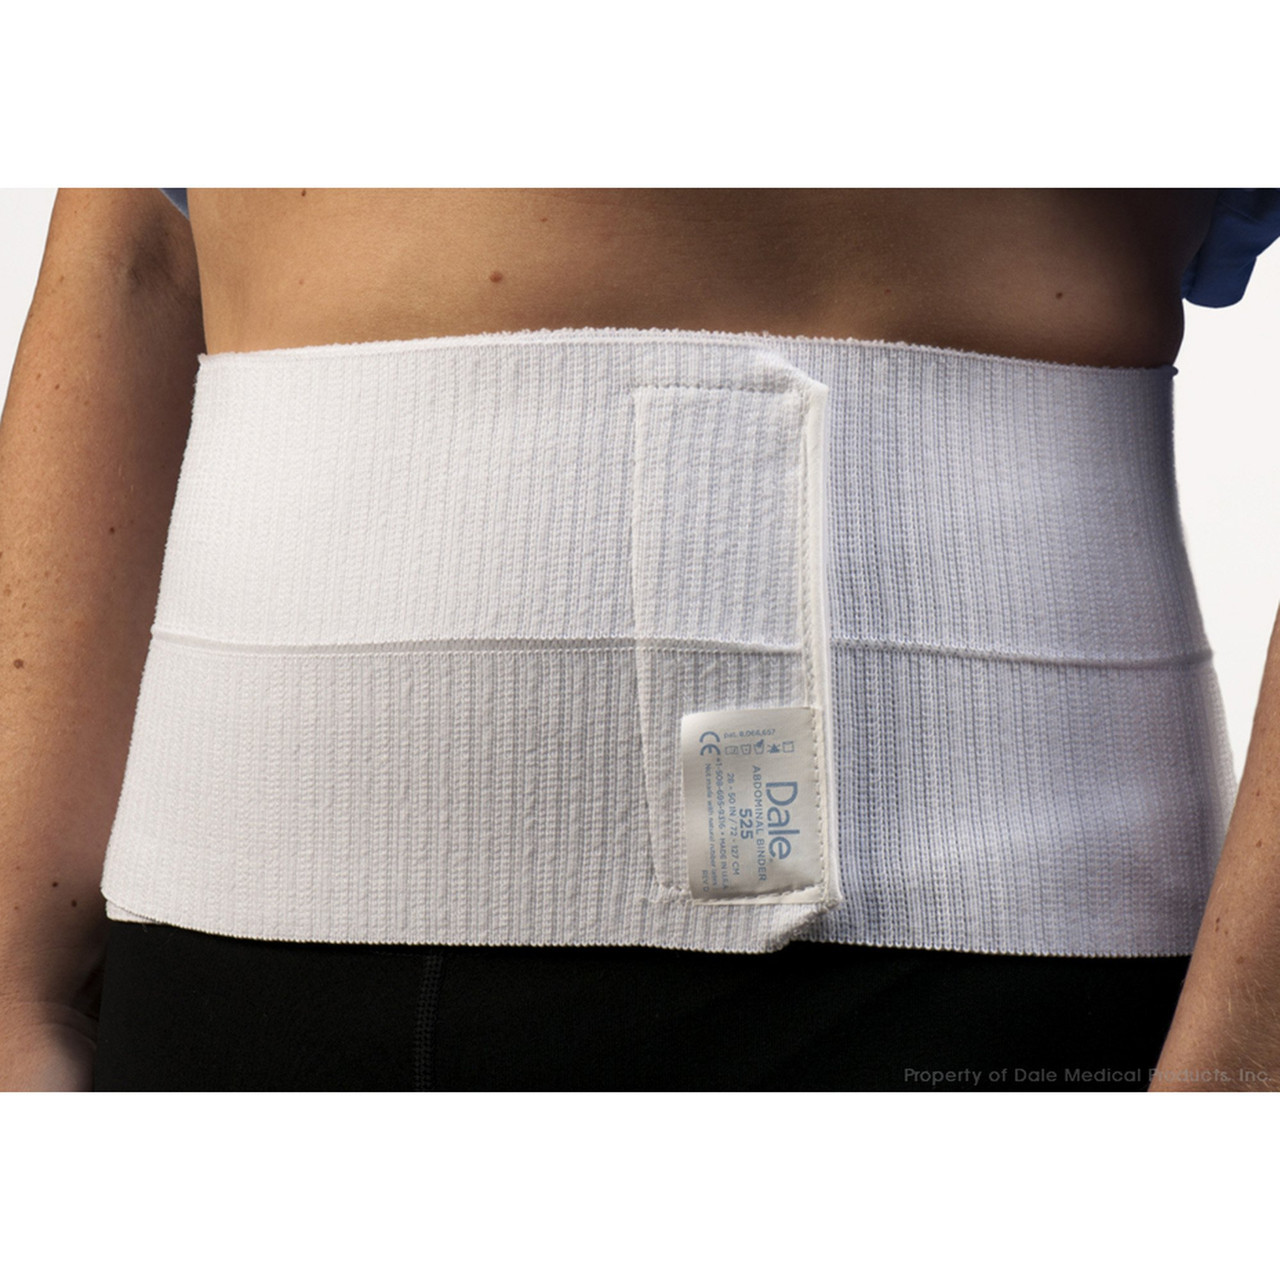 Dale® Abdominal Binders with Easygrip Strip - Healthcare21